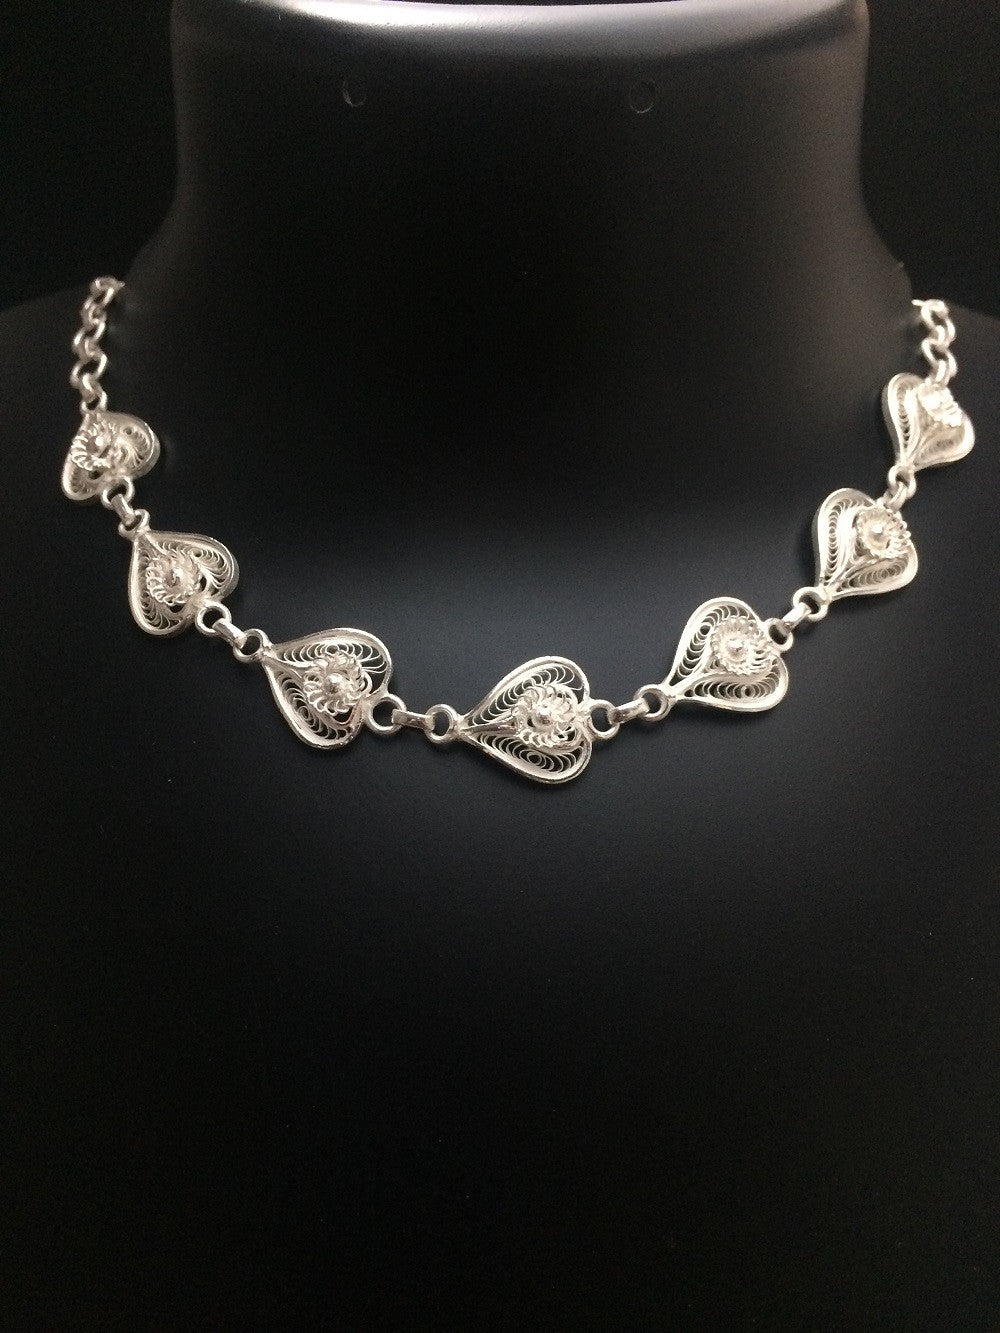 Beautiful Silver Filigree Necklaces      